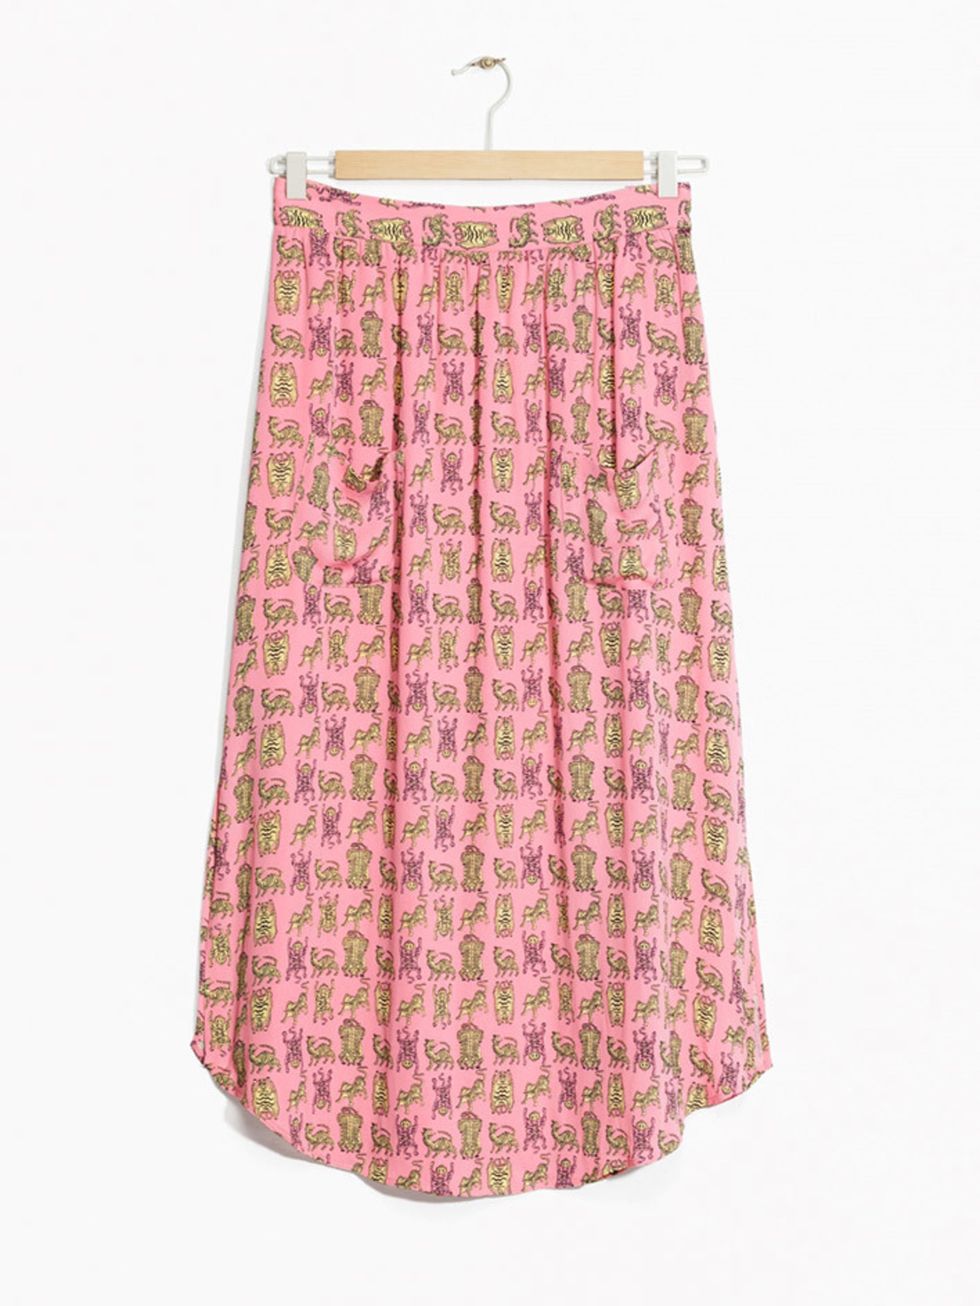 <p><a href="http://www.stories.com/gb/New_in/All_new_in/Tigress_Pocket_Skirt/108773759-114335921.1" target="_blank">Viscose skirt, £45, & Other Stories</a></p>